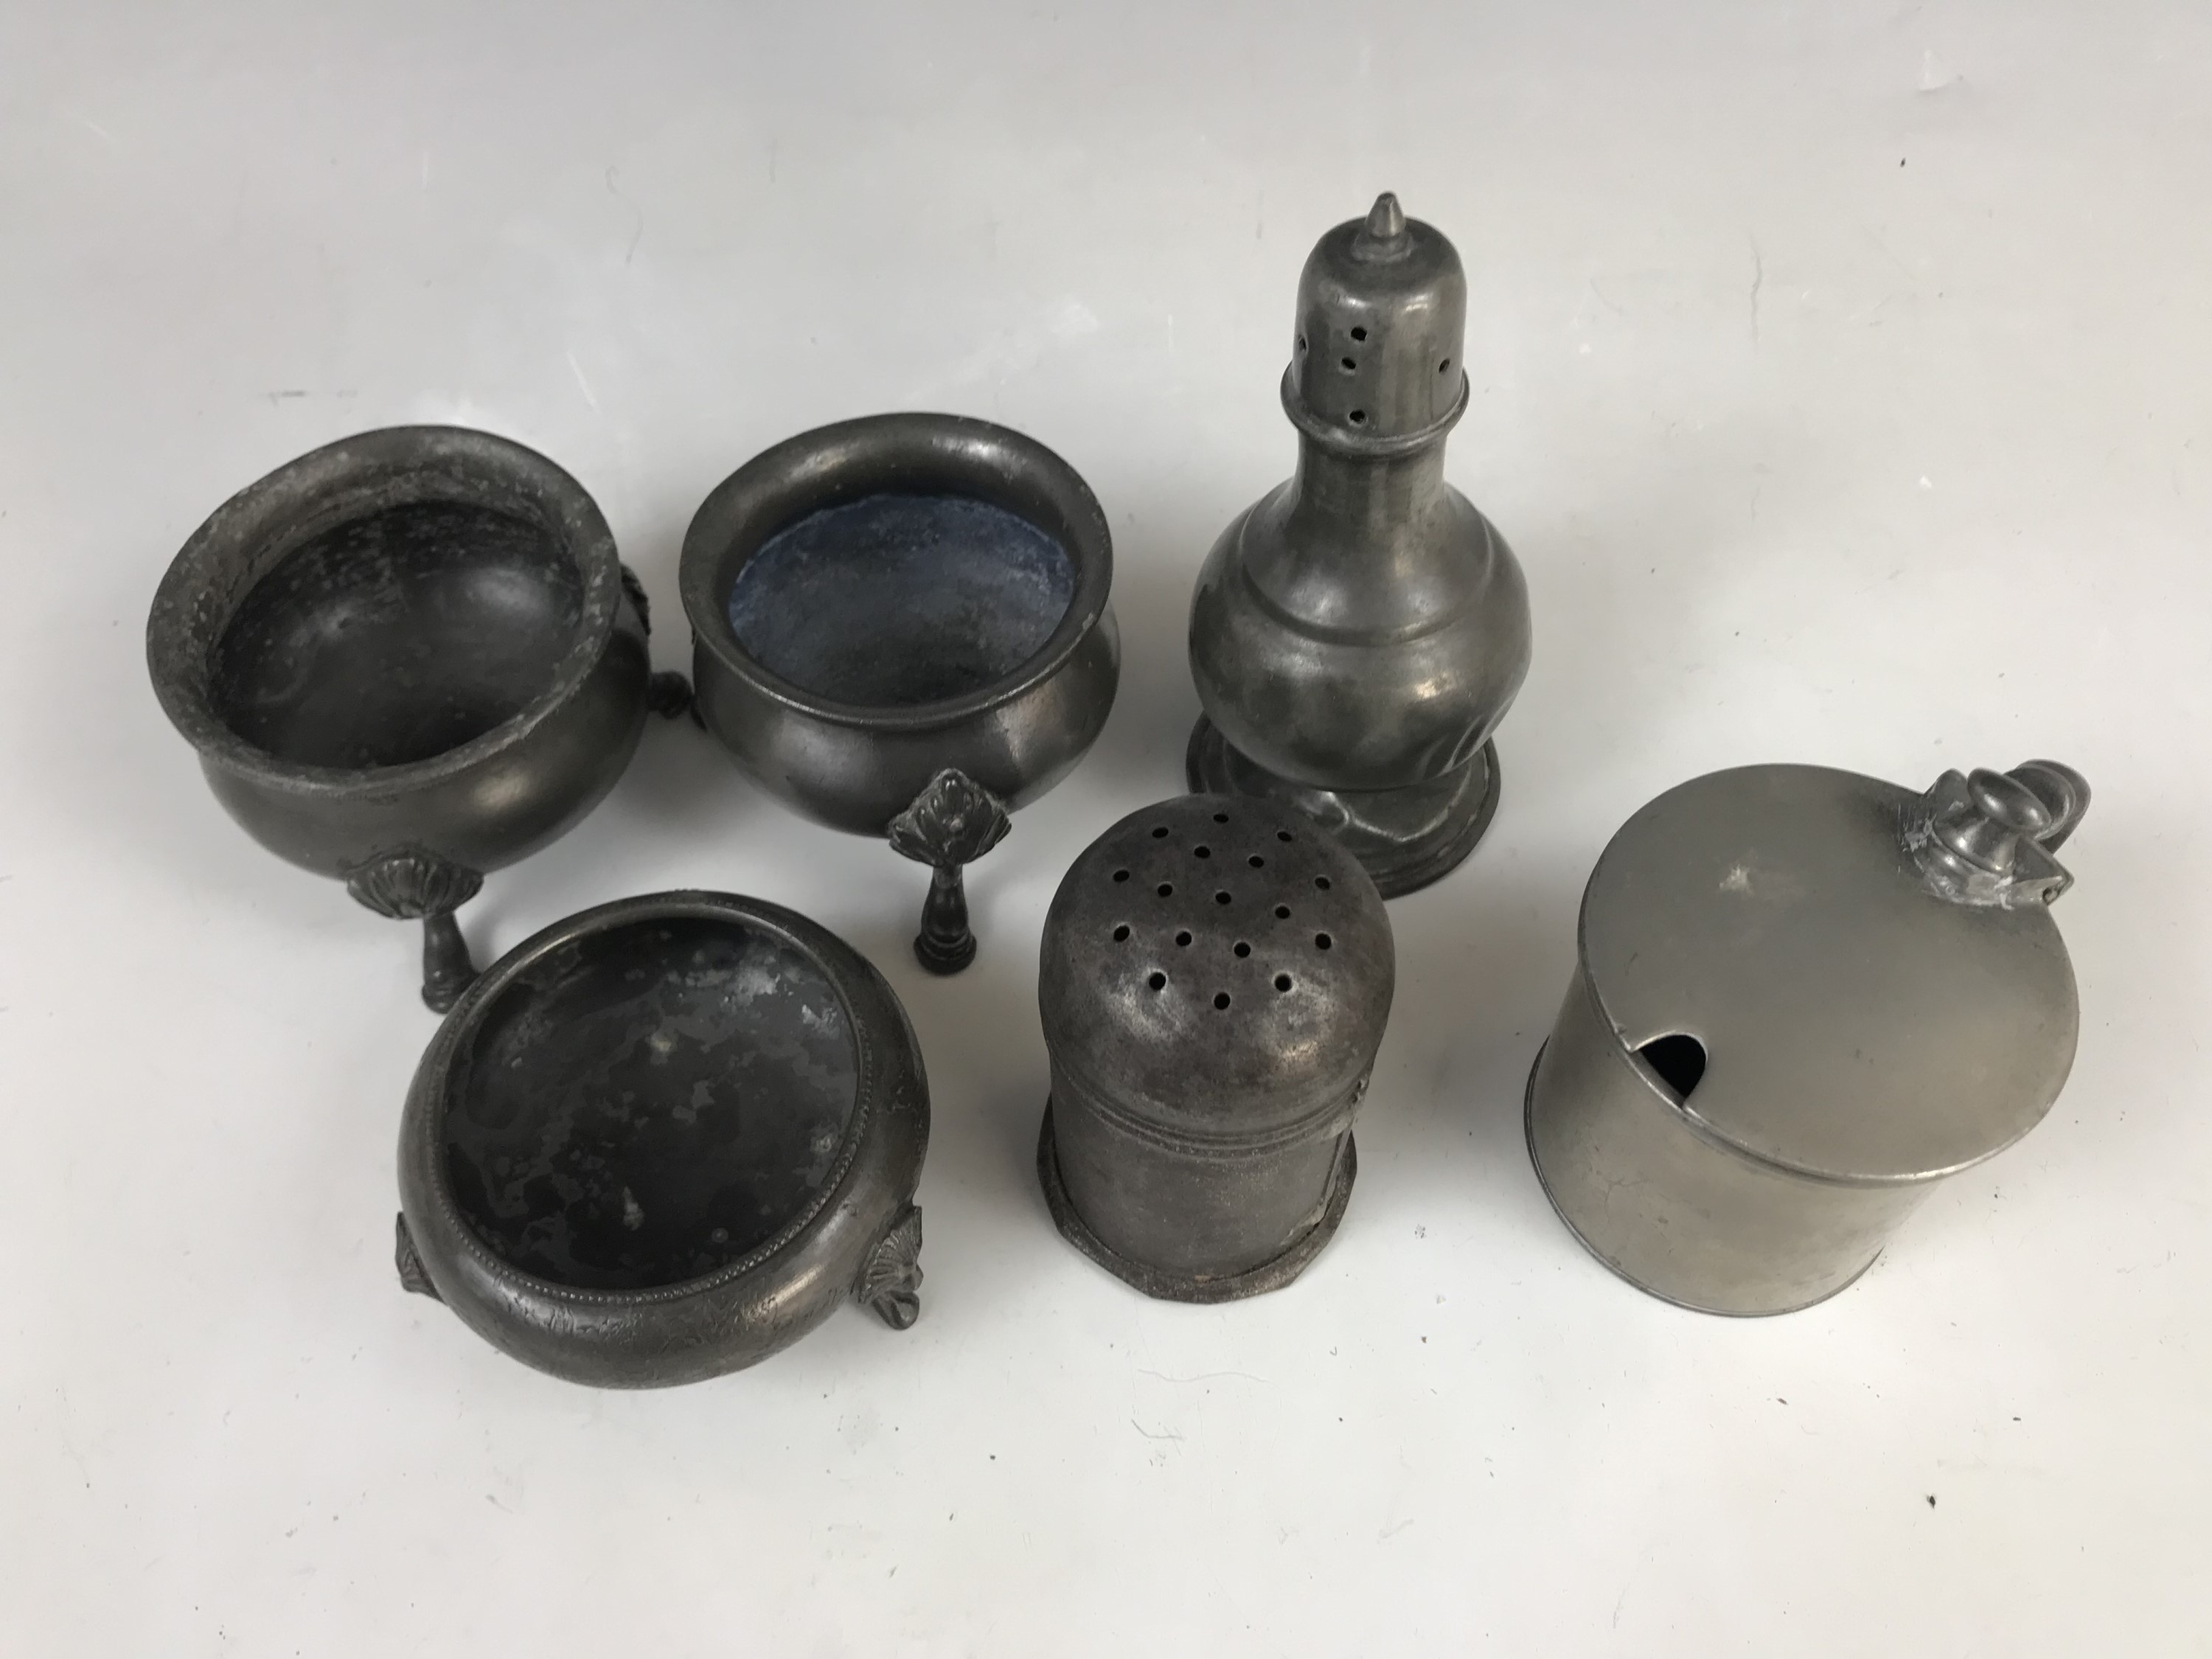 Sundry items of small domestic pewter, including a mustard pot and three cauldron-form salts